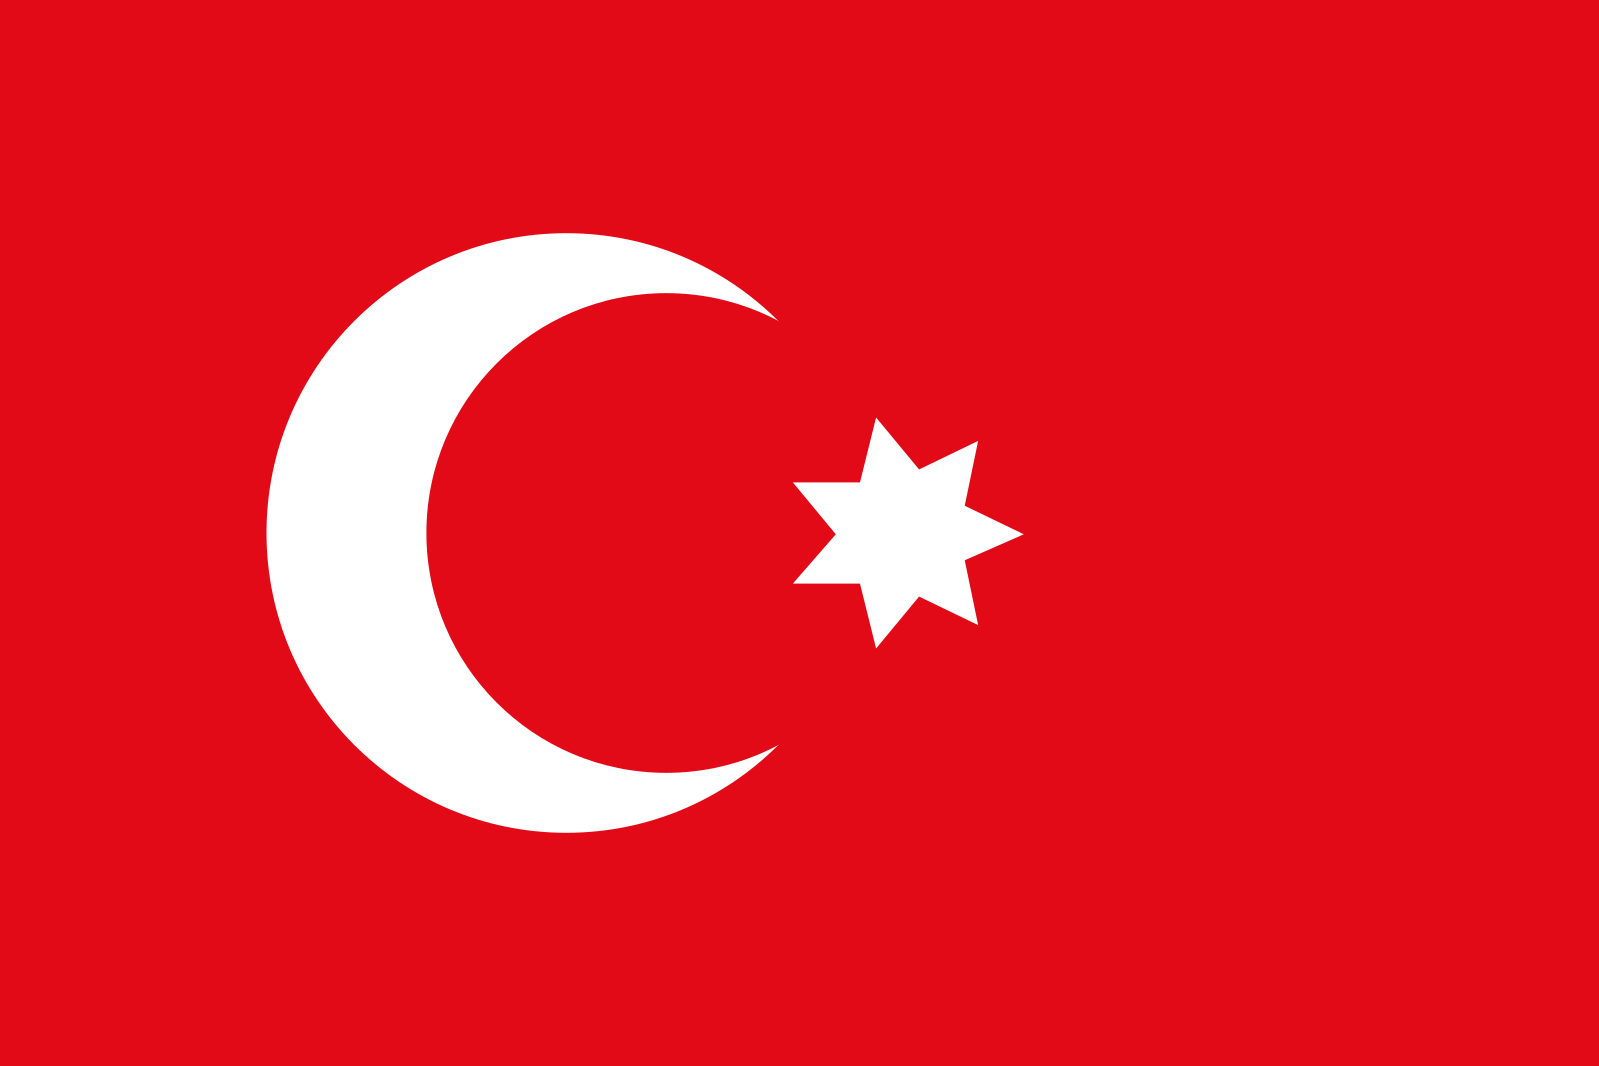 1599px-Flag_of_the_Ottoman_Empire_(also_used_in_Egypt).svg